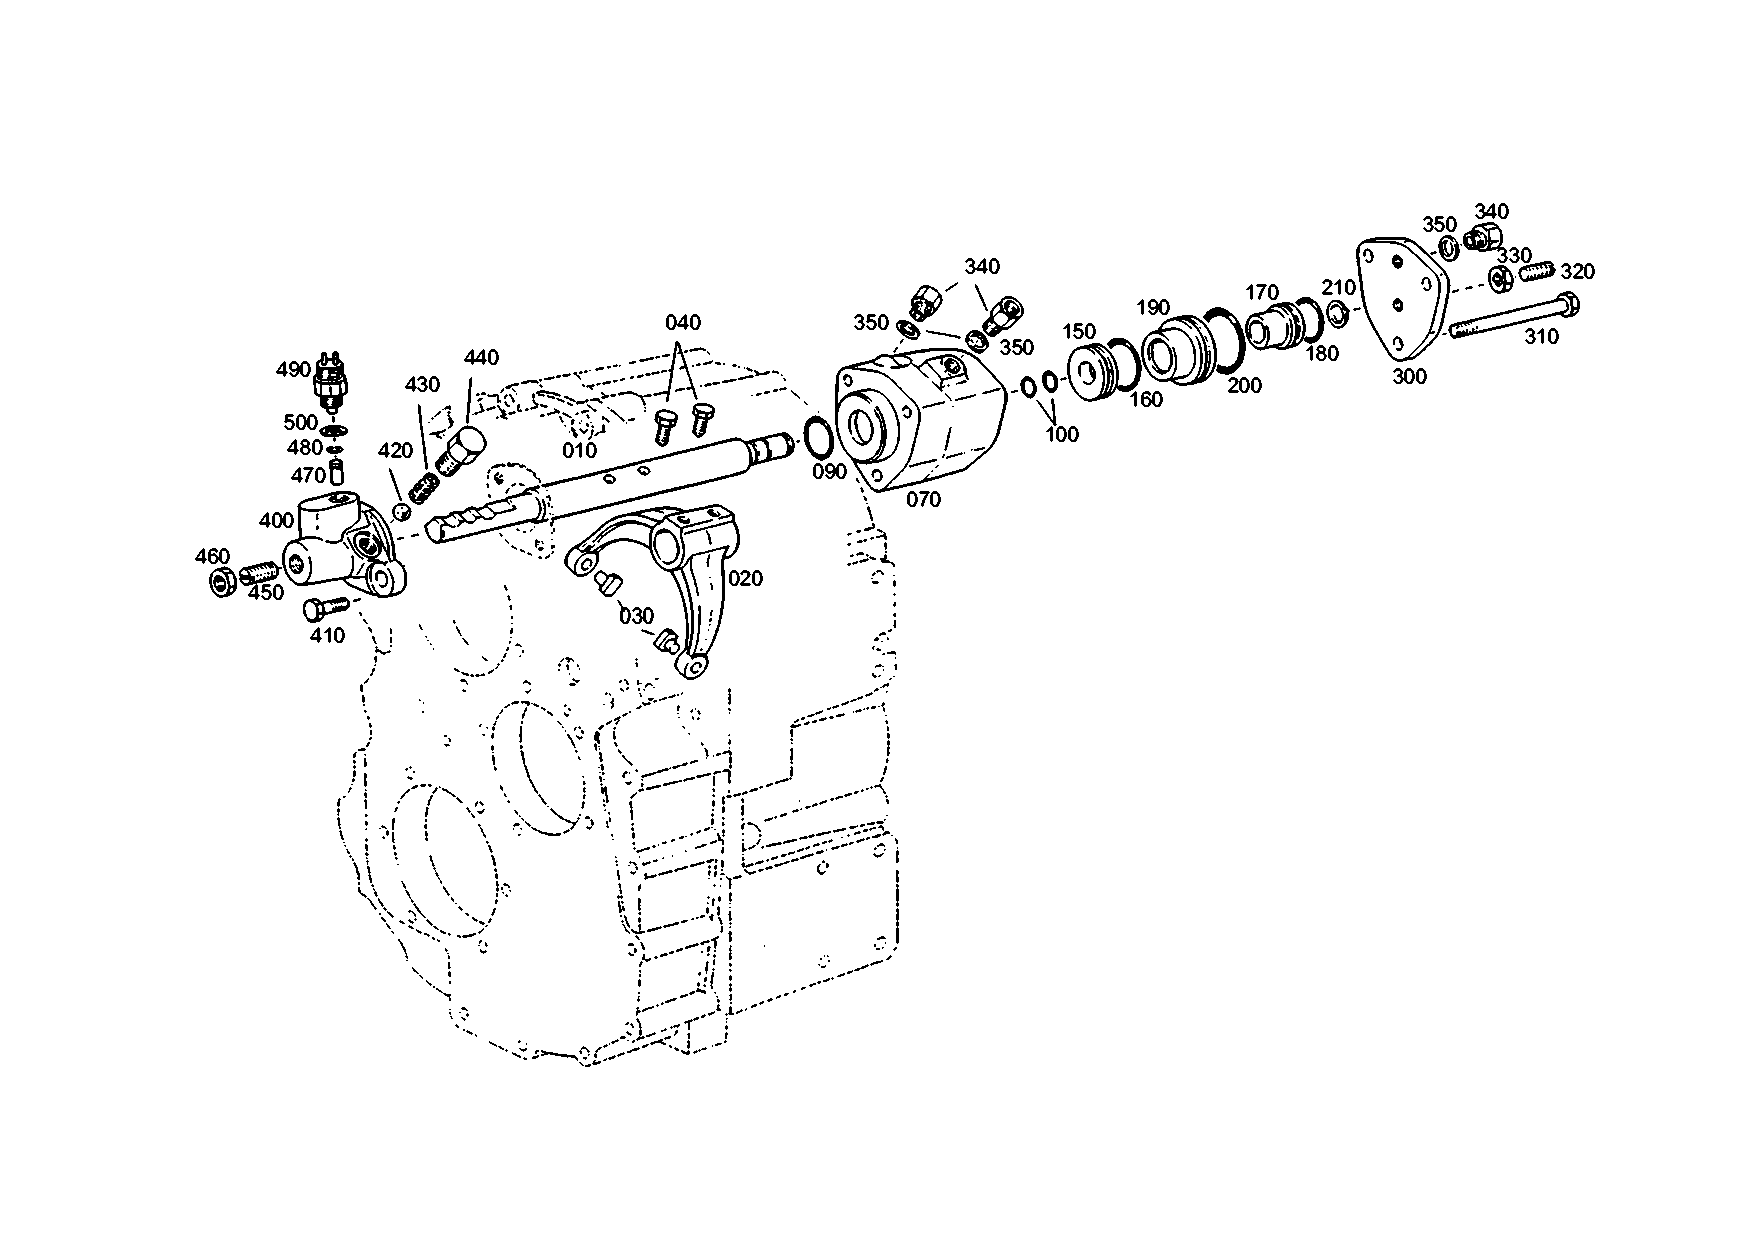 drawing for MARMON Herring MVG121045 - SHIFT CYLINDER (figure 1)